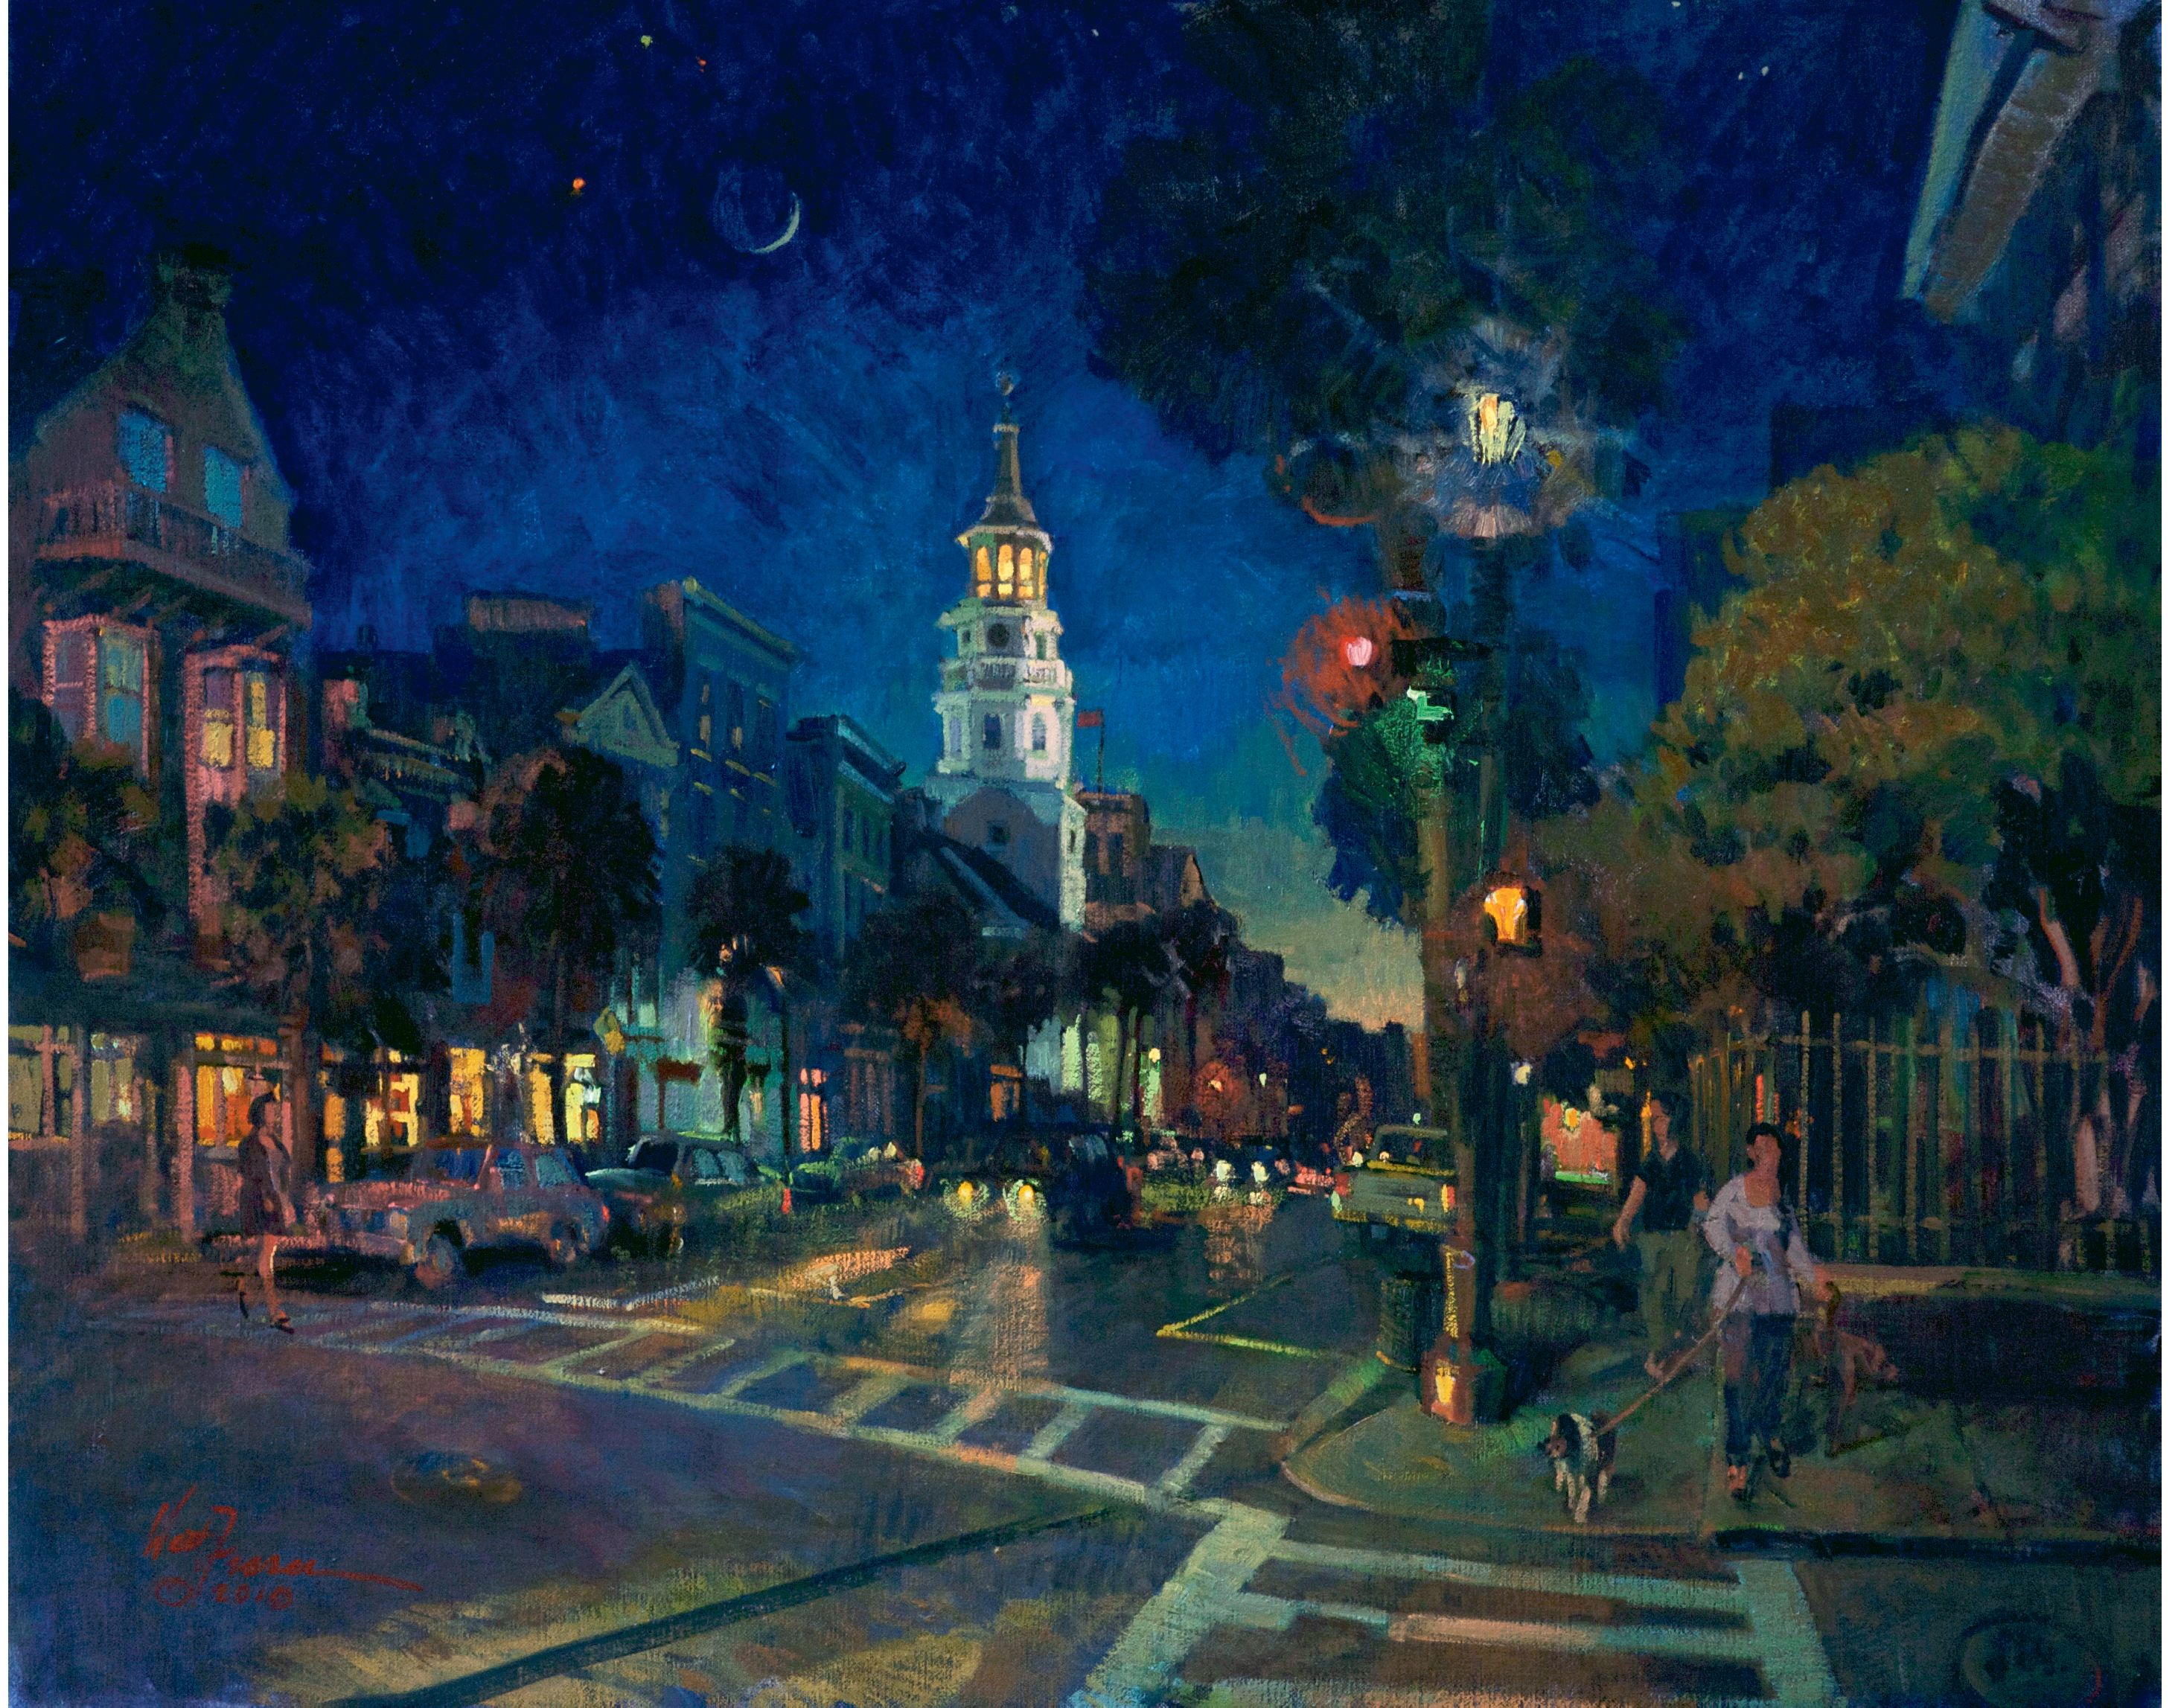 Venus, Saturn, Mars, and  the Crescent Moon (Charleston, South Carolina; oil; 24 × 30 inches; 2010; private collection)